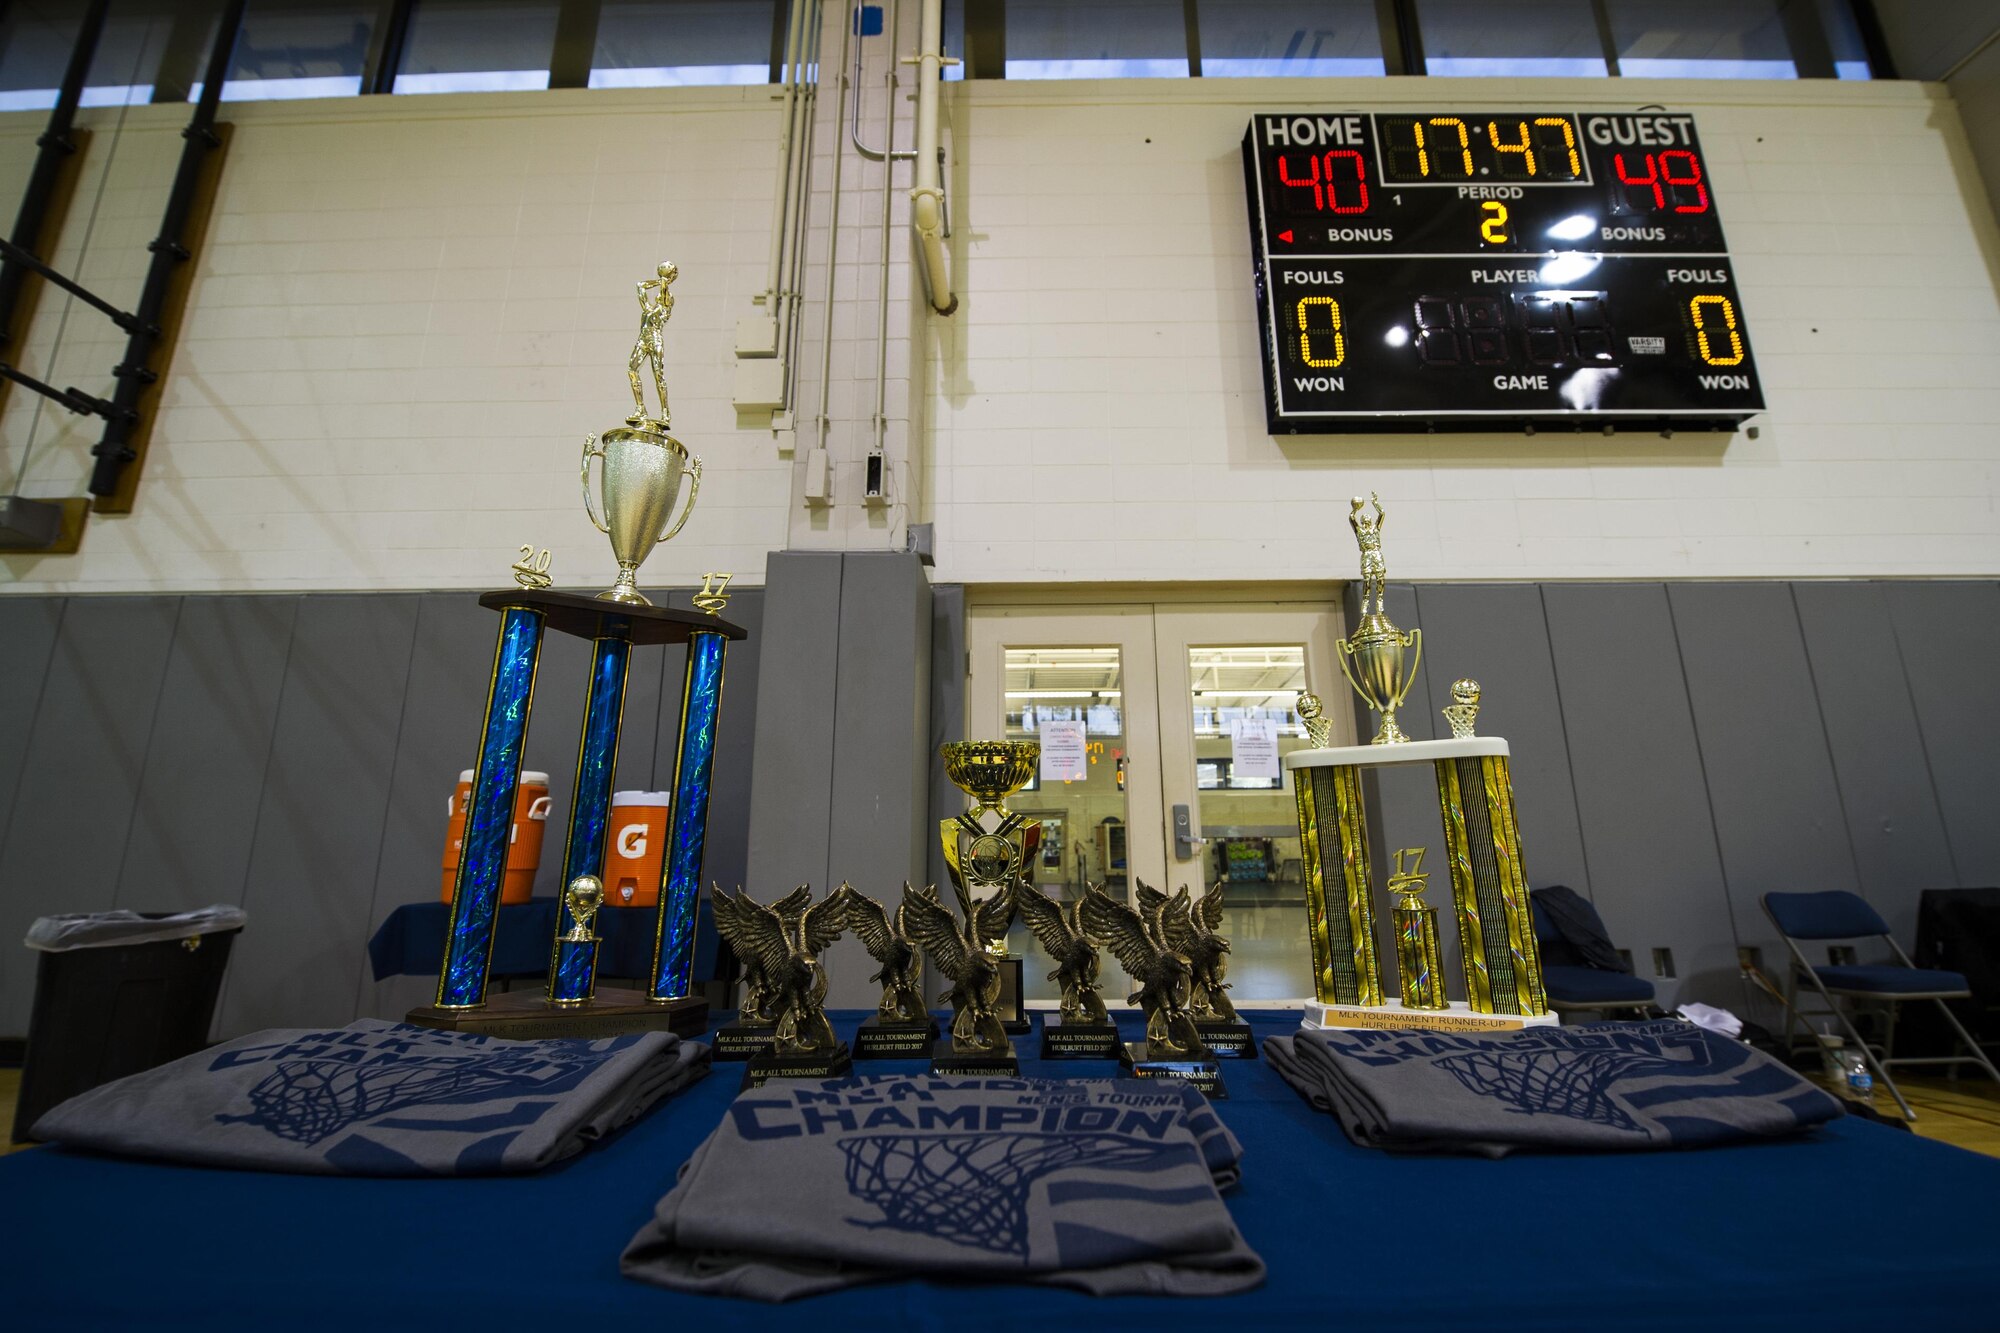 The 1st Special Operations Force Support Squadron hosted a basketball tournament to commemorate and celebrate Martin Luther King Jr. Day. Eight Air Force teams from nearby bases competed in the two-day, double-elimination tournament. Hurlburt Field finished second in the championship game against Maxwell Air Force Base in the 2nd annual Martin Luther King Jr. Day tournament. (U.S. Air Force photo by Airman 1st Class Joseph Pick)